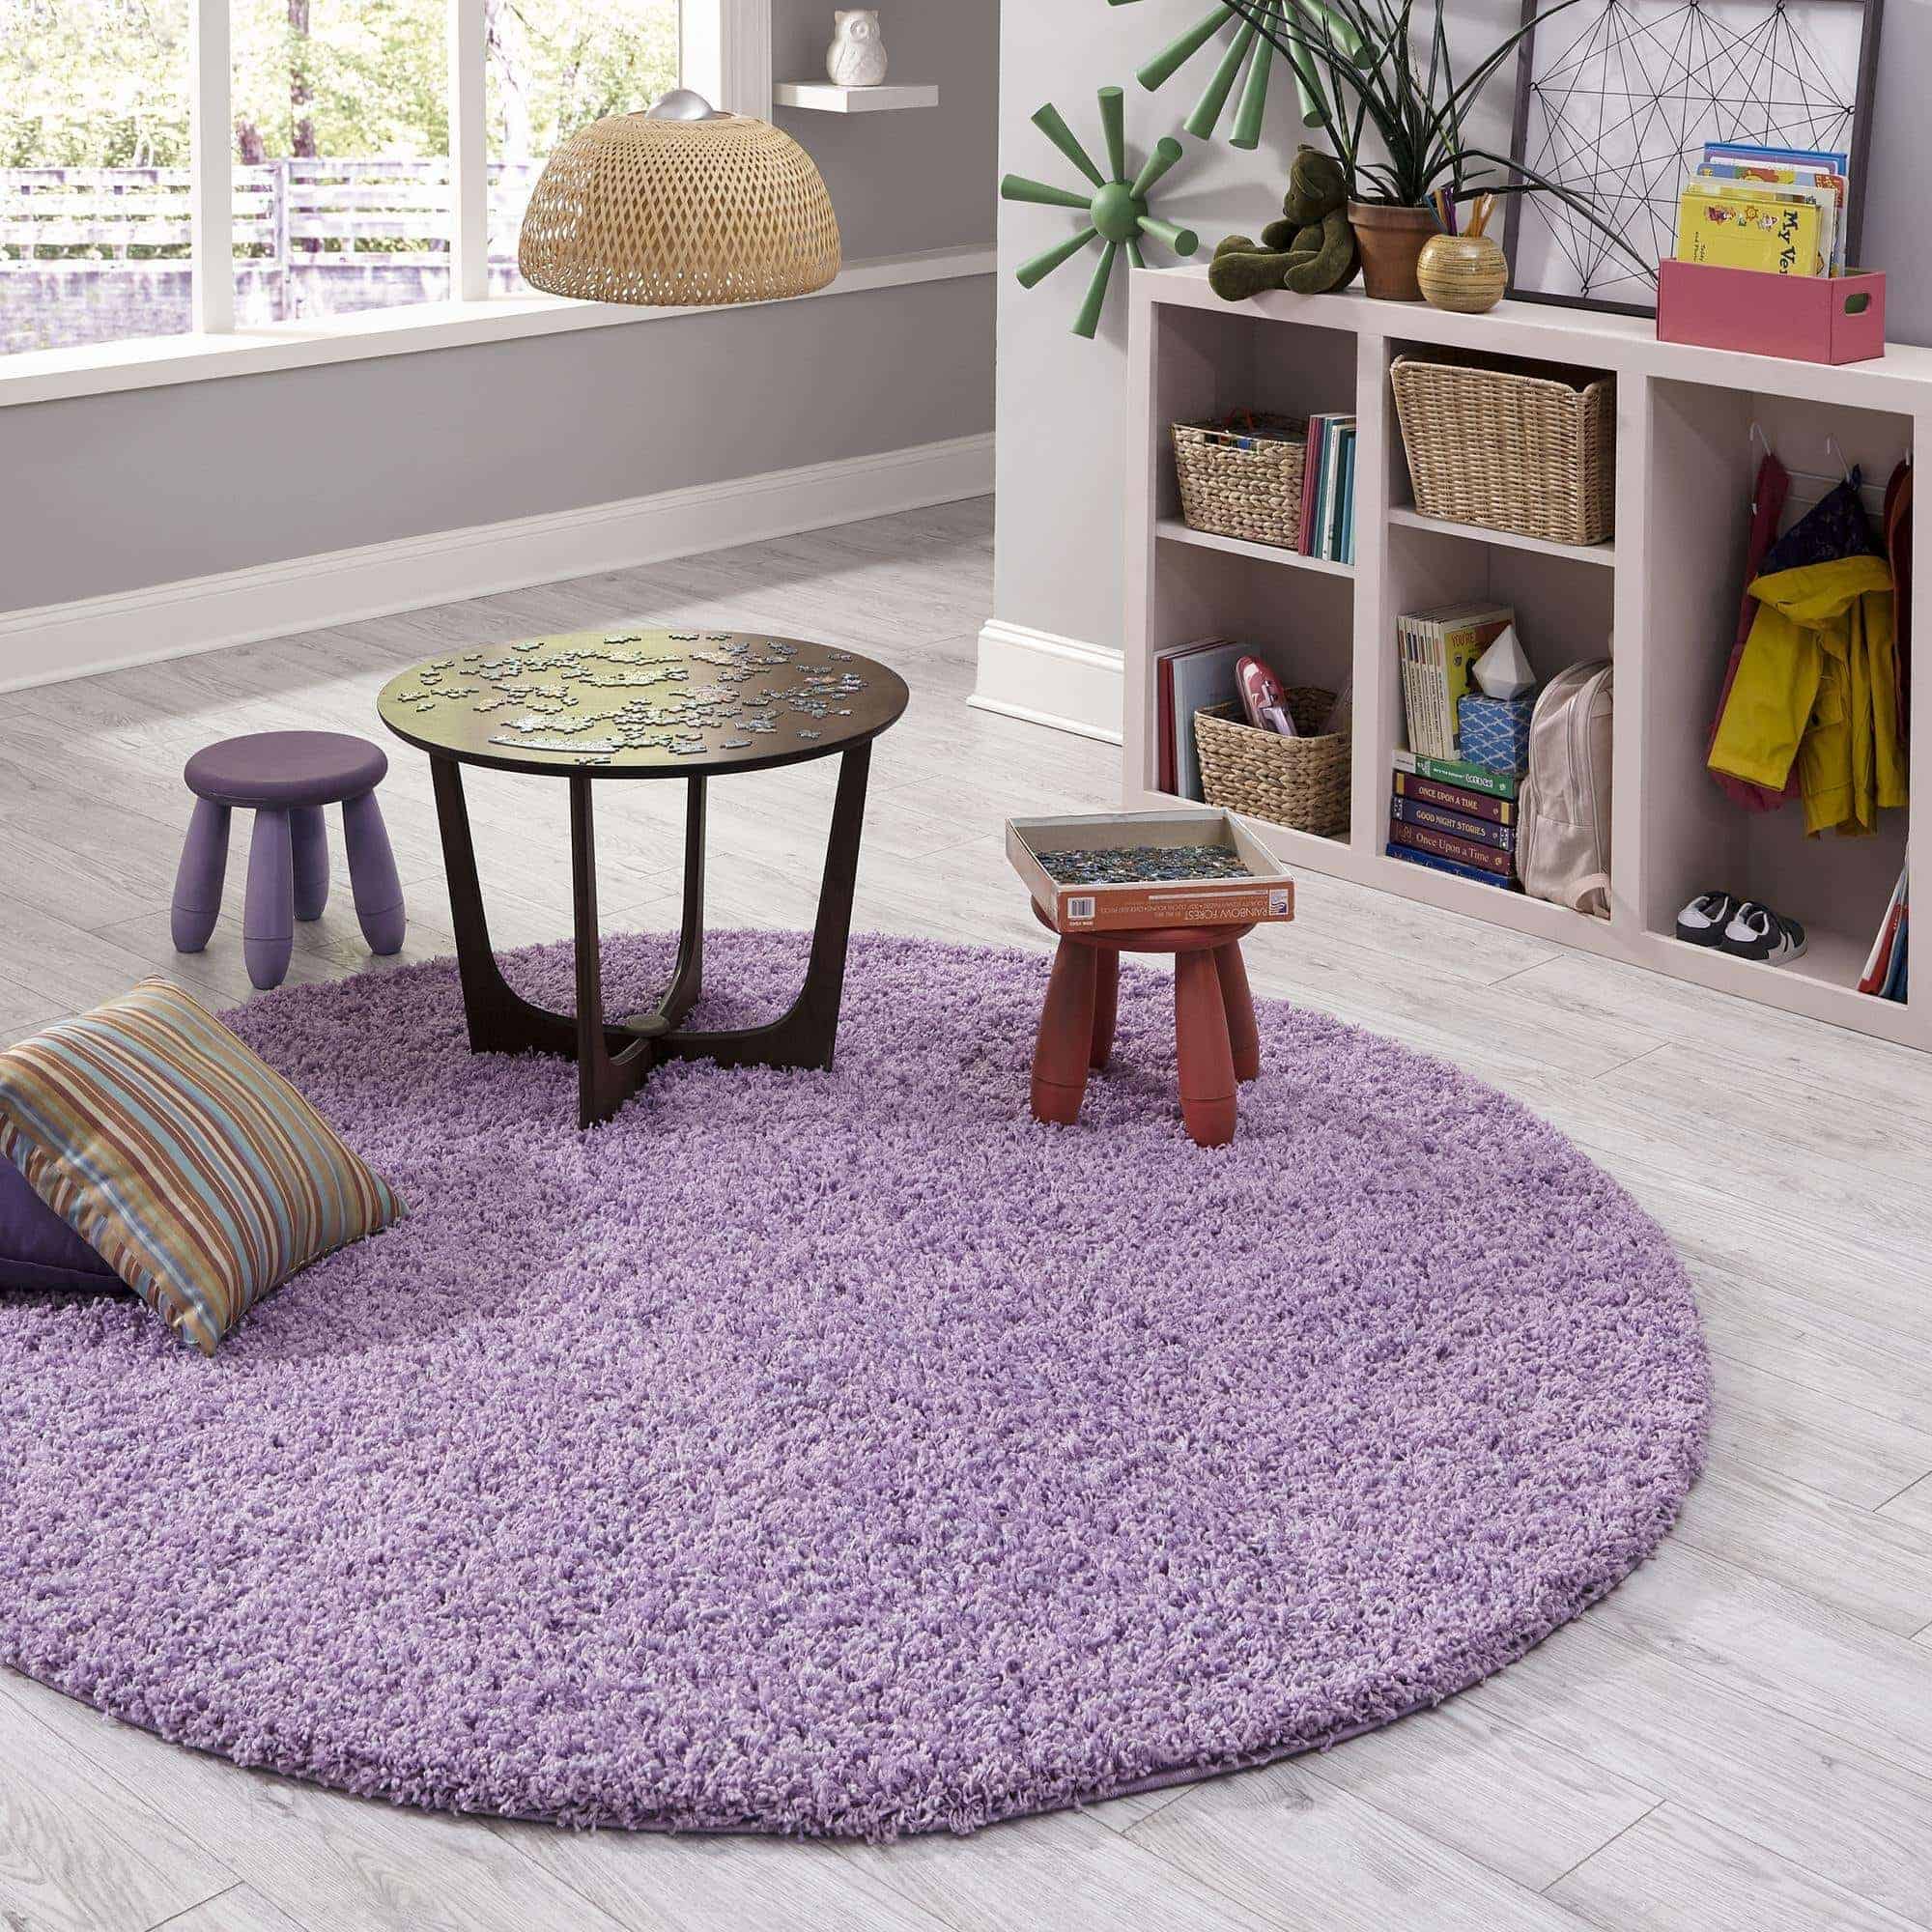 Lilac Rugs Add A Touch Of Warmth To Light Grey Floors